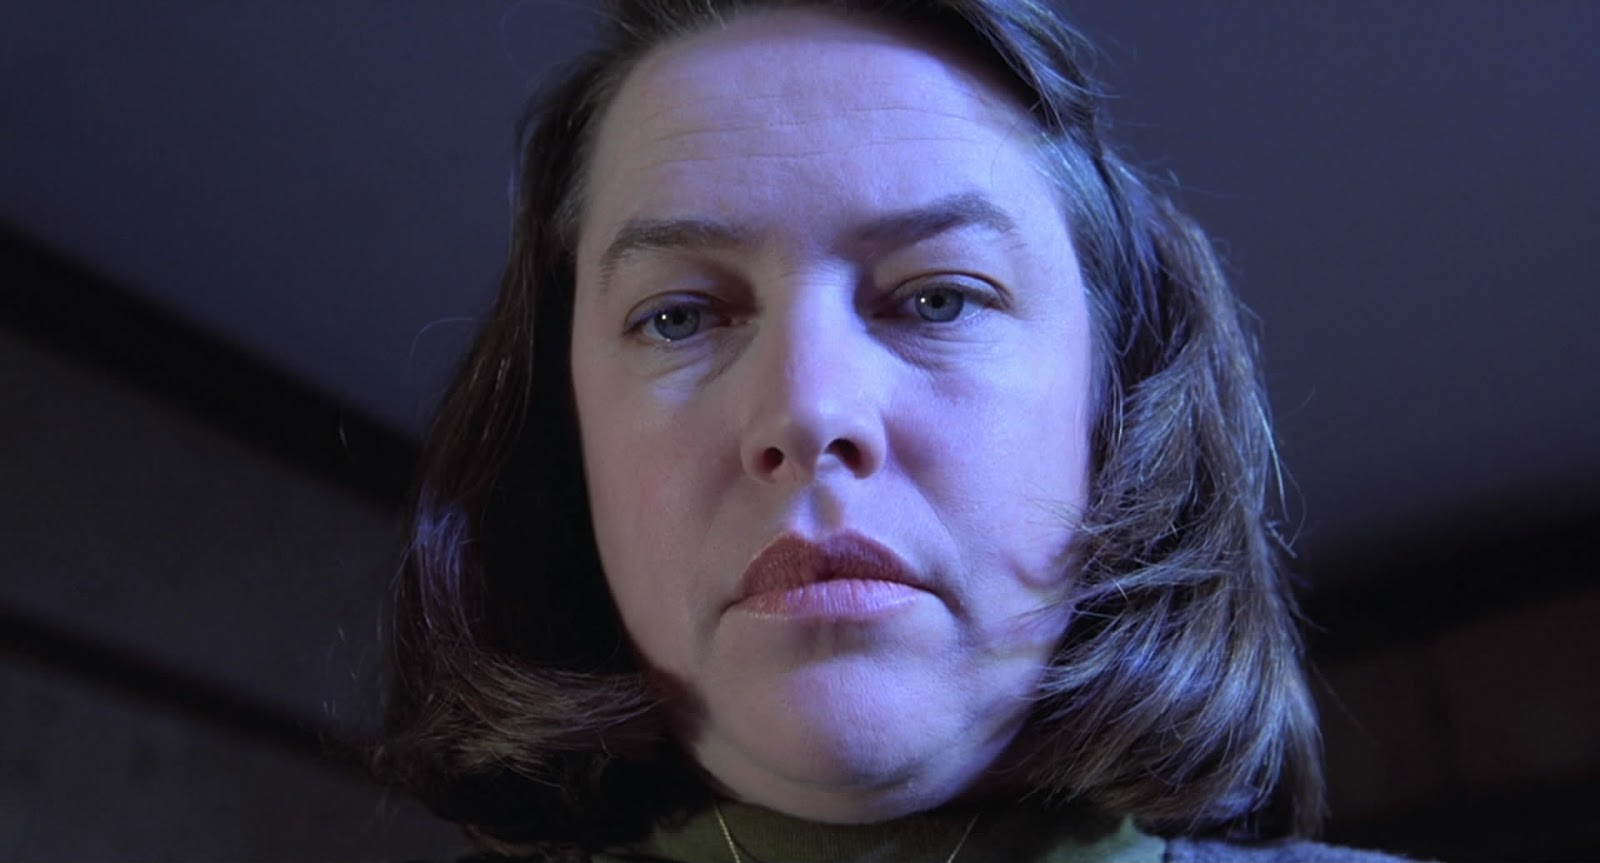 Kathy Bates Misery Quotes. QuotesGram